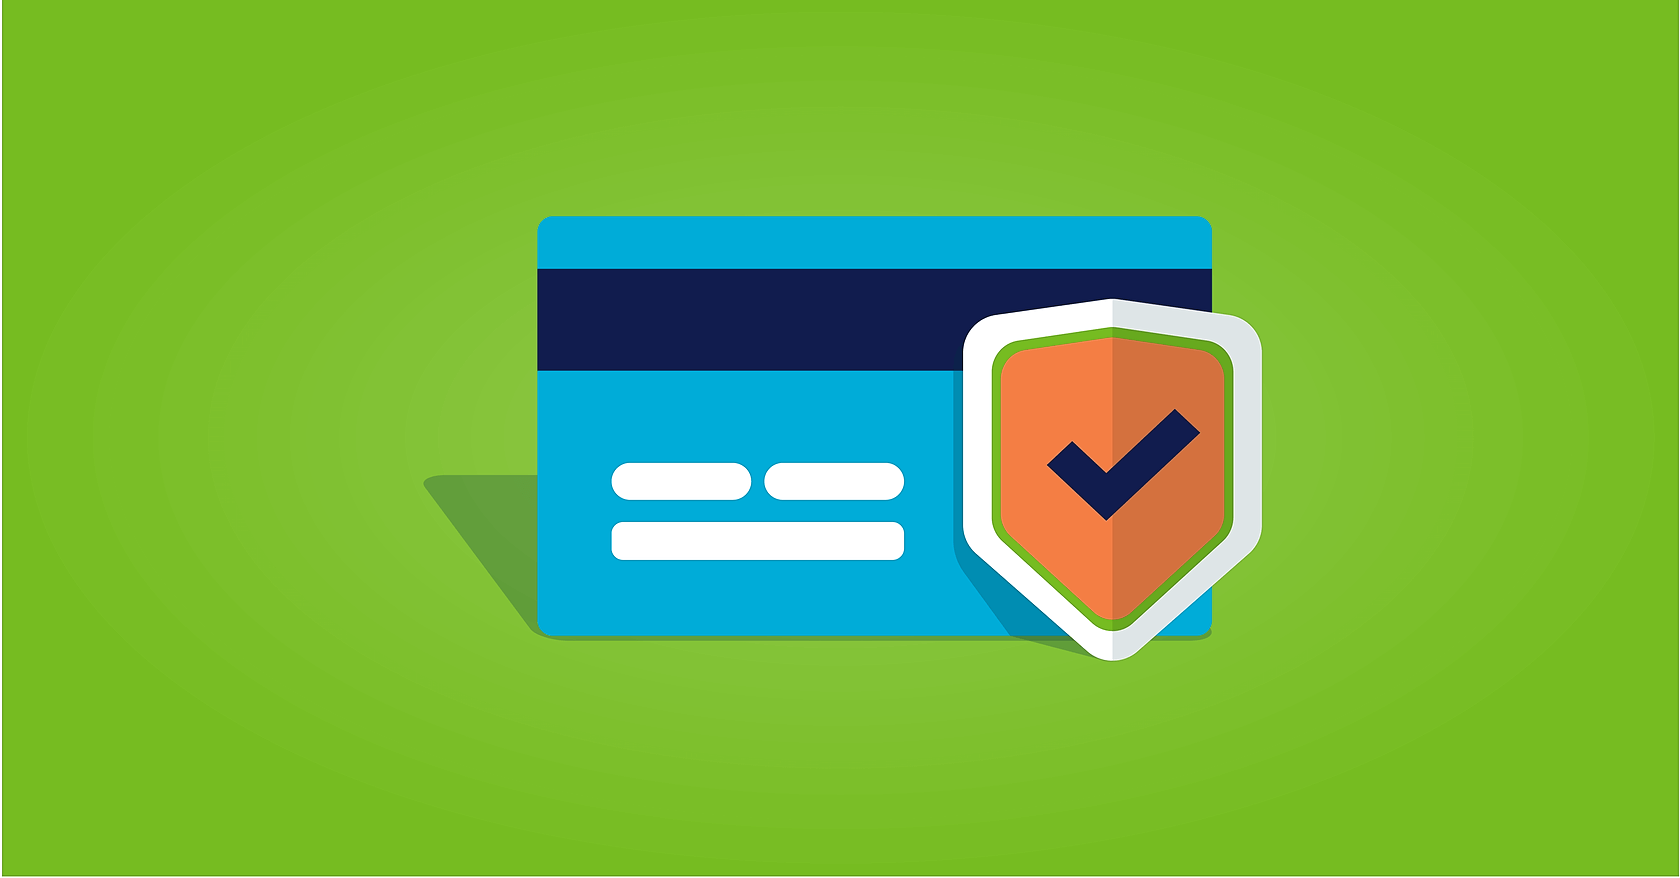 An icon of a credit card with a shield on it, representing cybersecurity solutions.